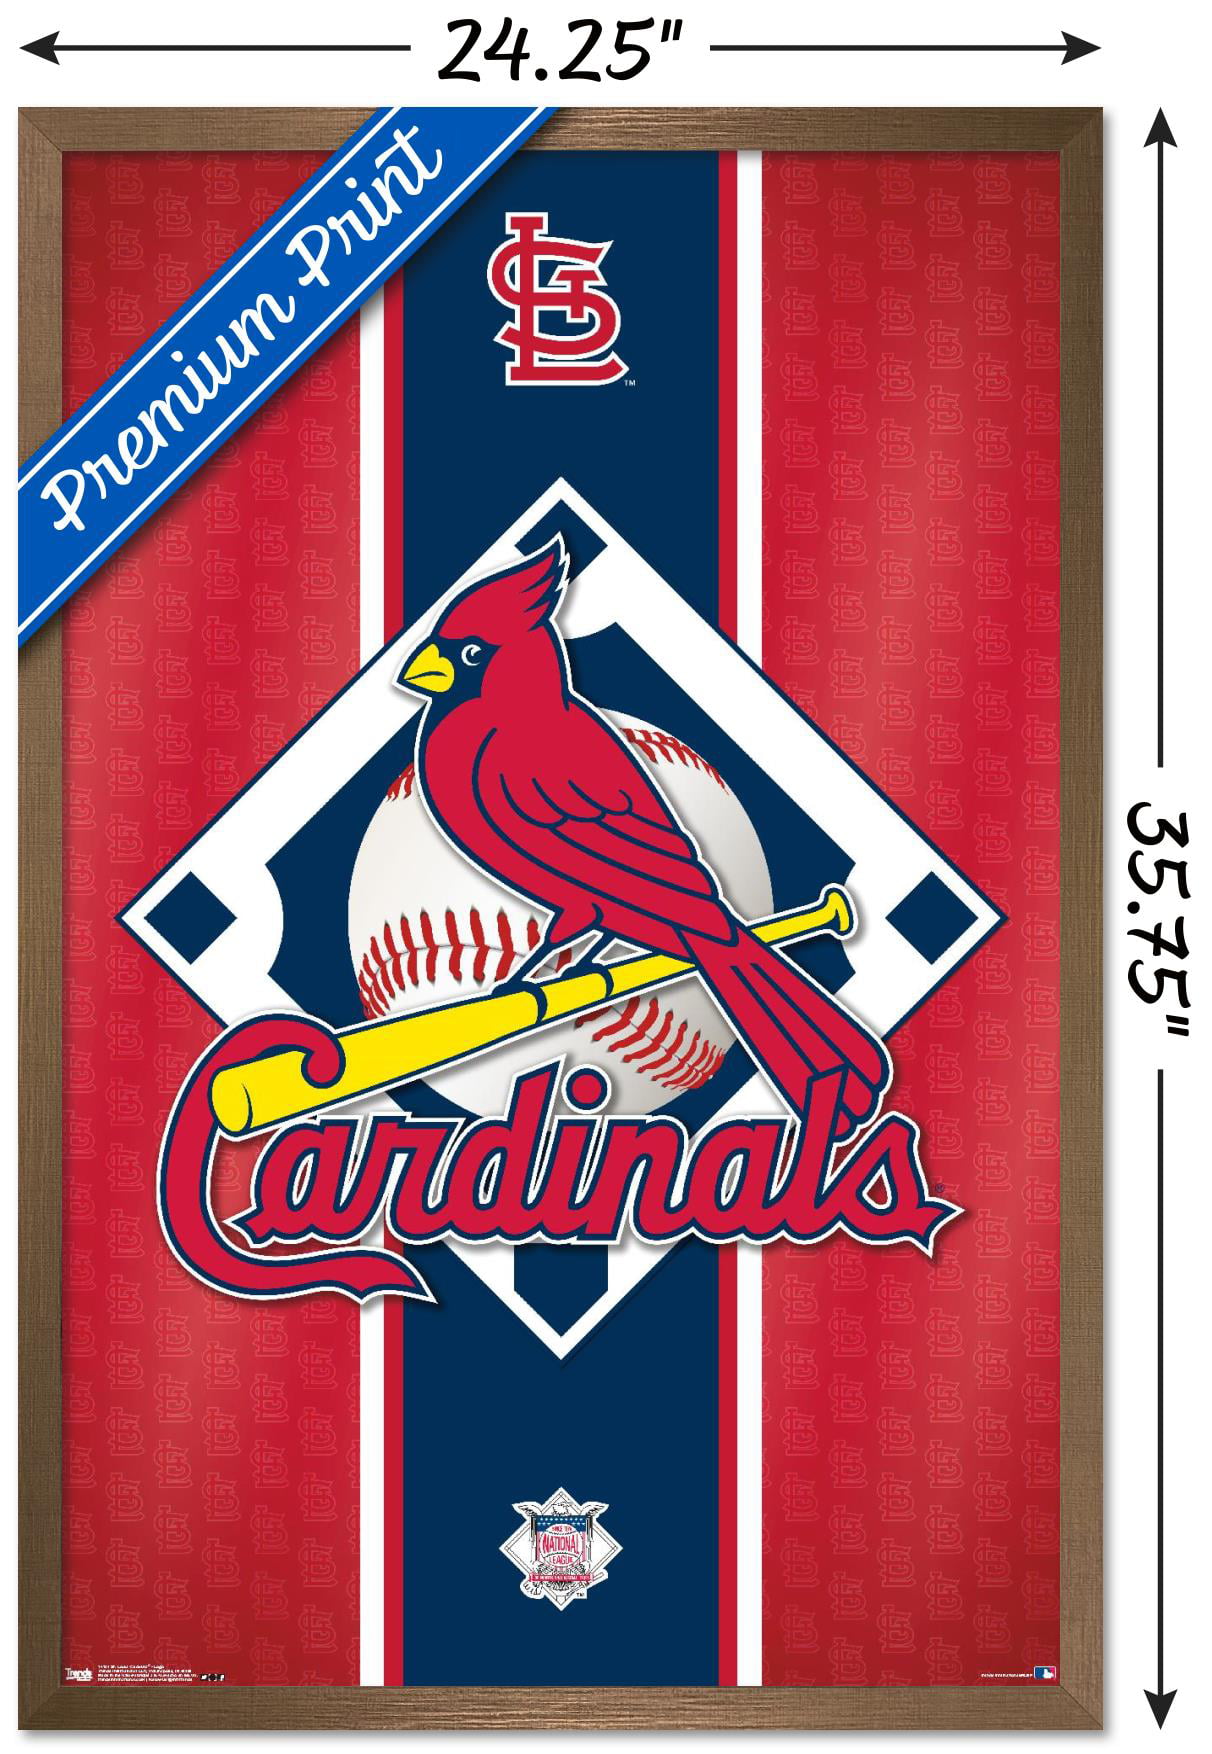 MLB St. Louis Cardinals - Champions Poster - 22.375 x 34 - The Blacklight  Zone